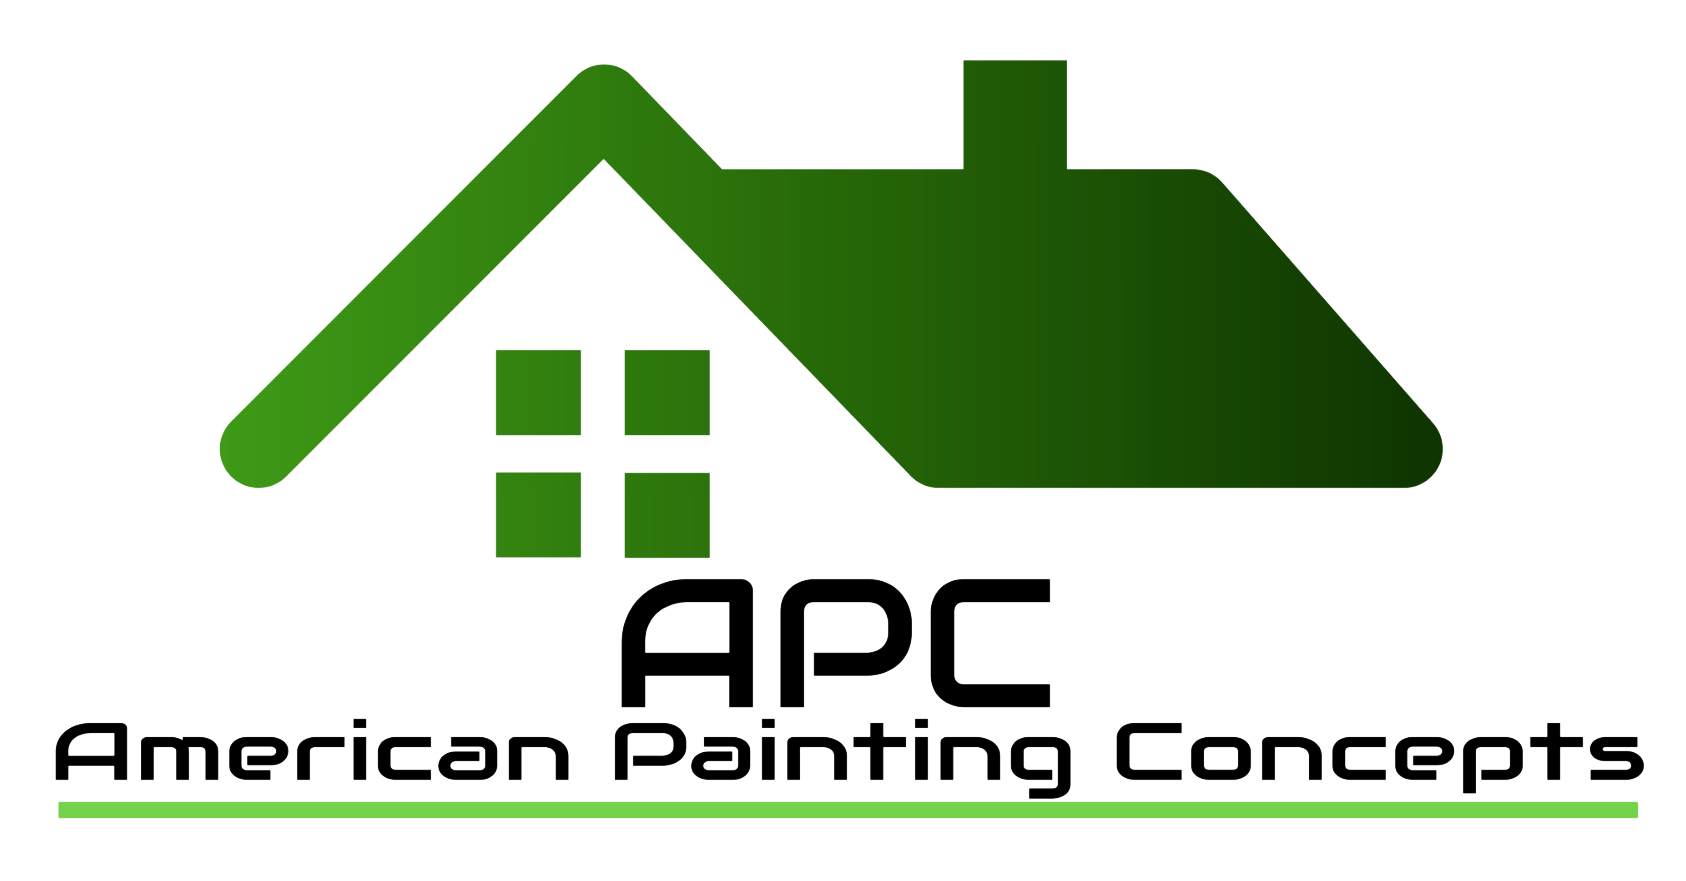 American Painting Concepts